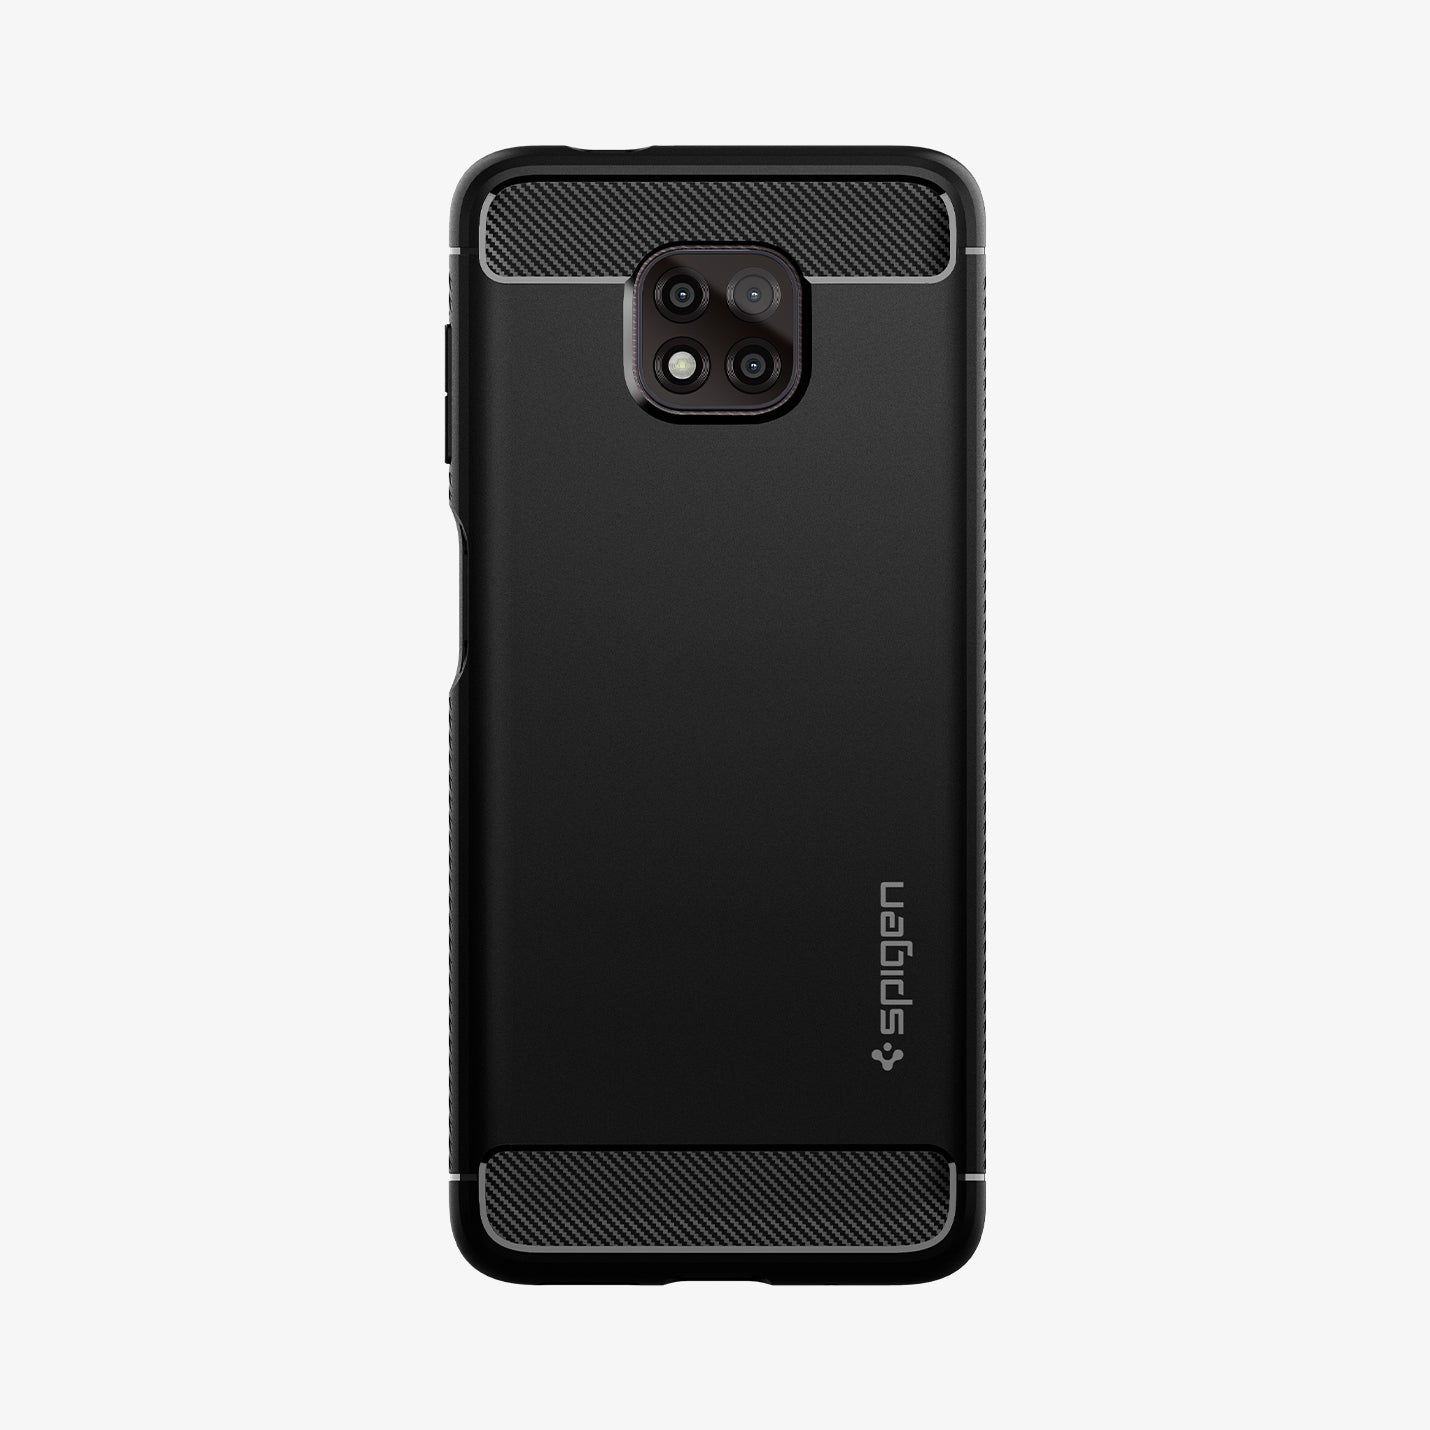 ACS02267 - Moto G Power 2021 Case Rugged Armor in black showing the back